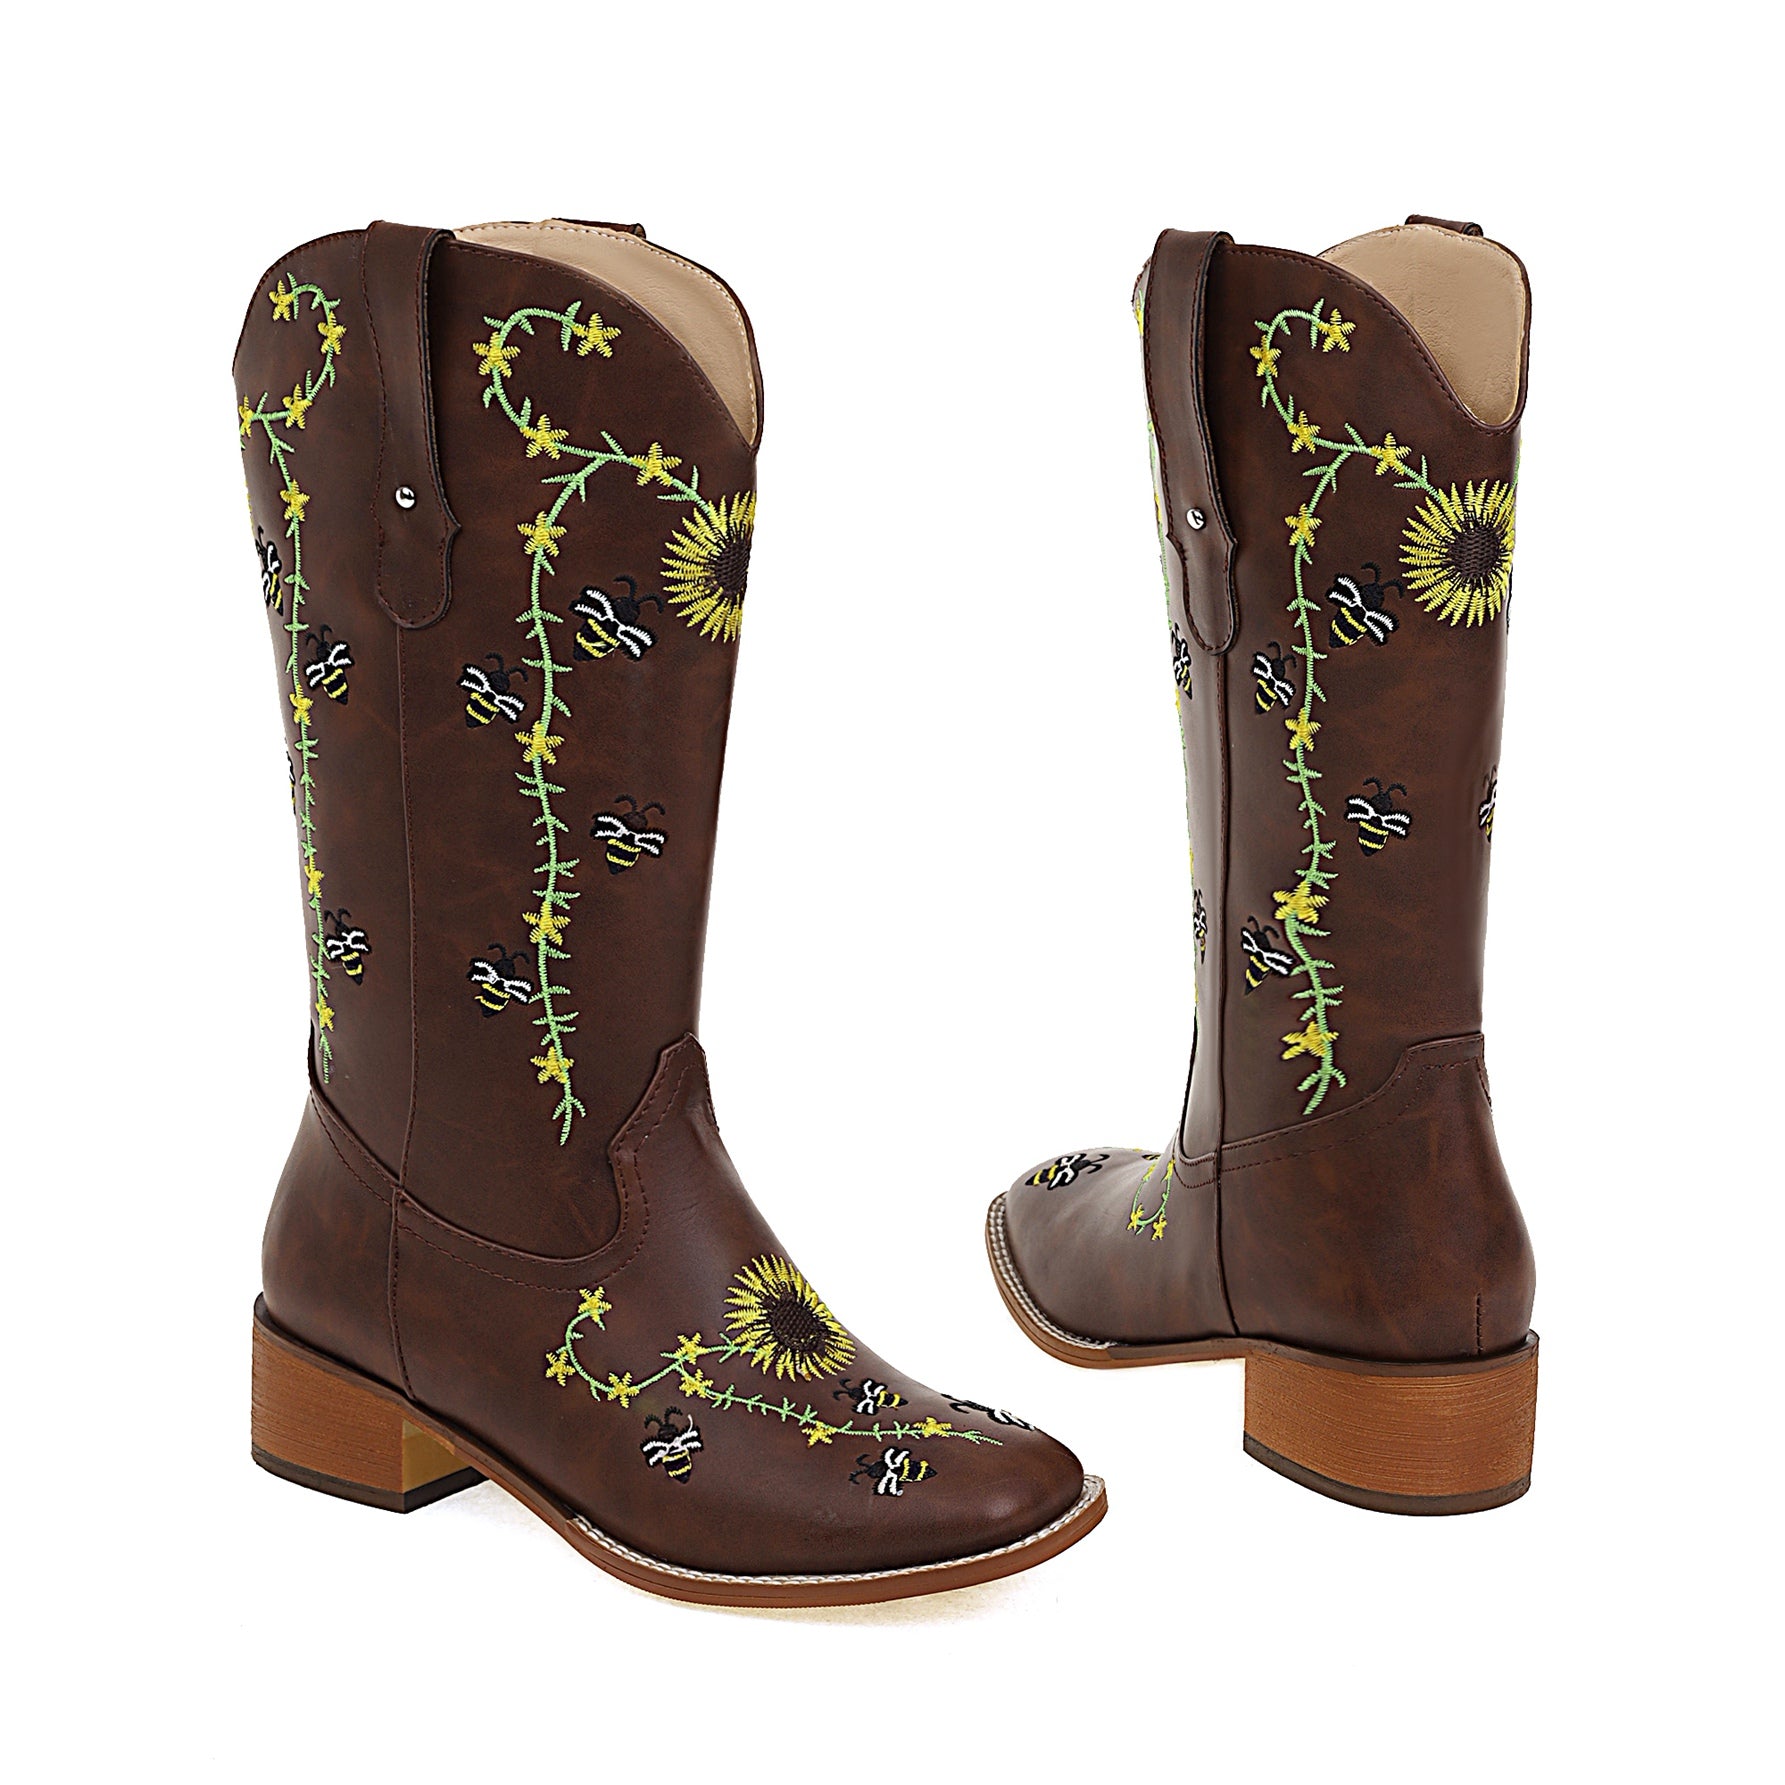 Bigsizeheels Western vintage Sunflowers embroidered boots - Brown freeshipping - bigsizeheel®-size5-size15 -All Plus Sizes Available!